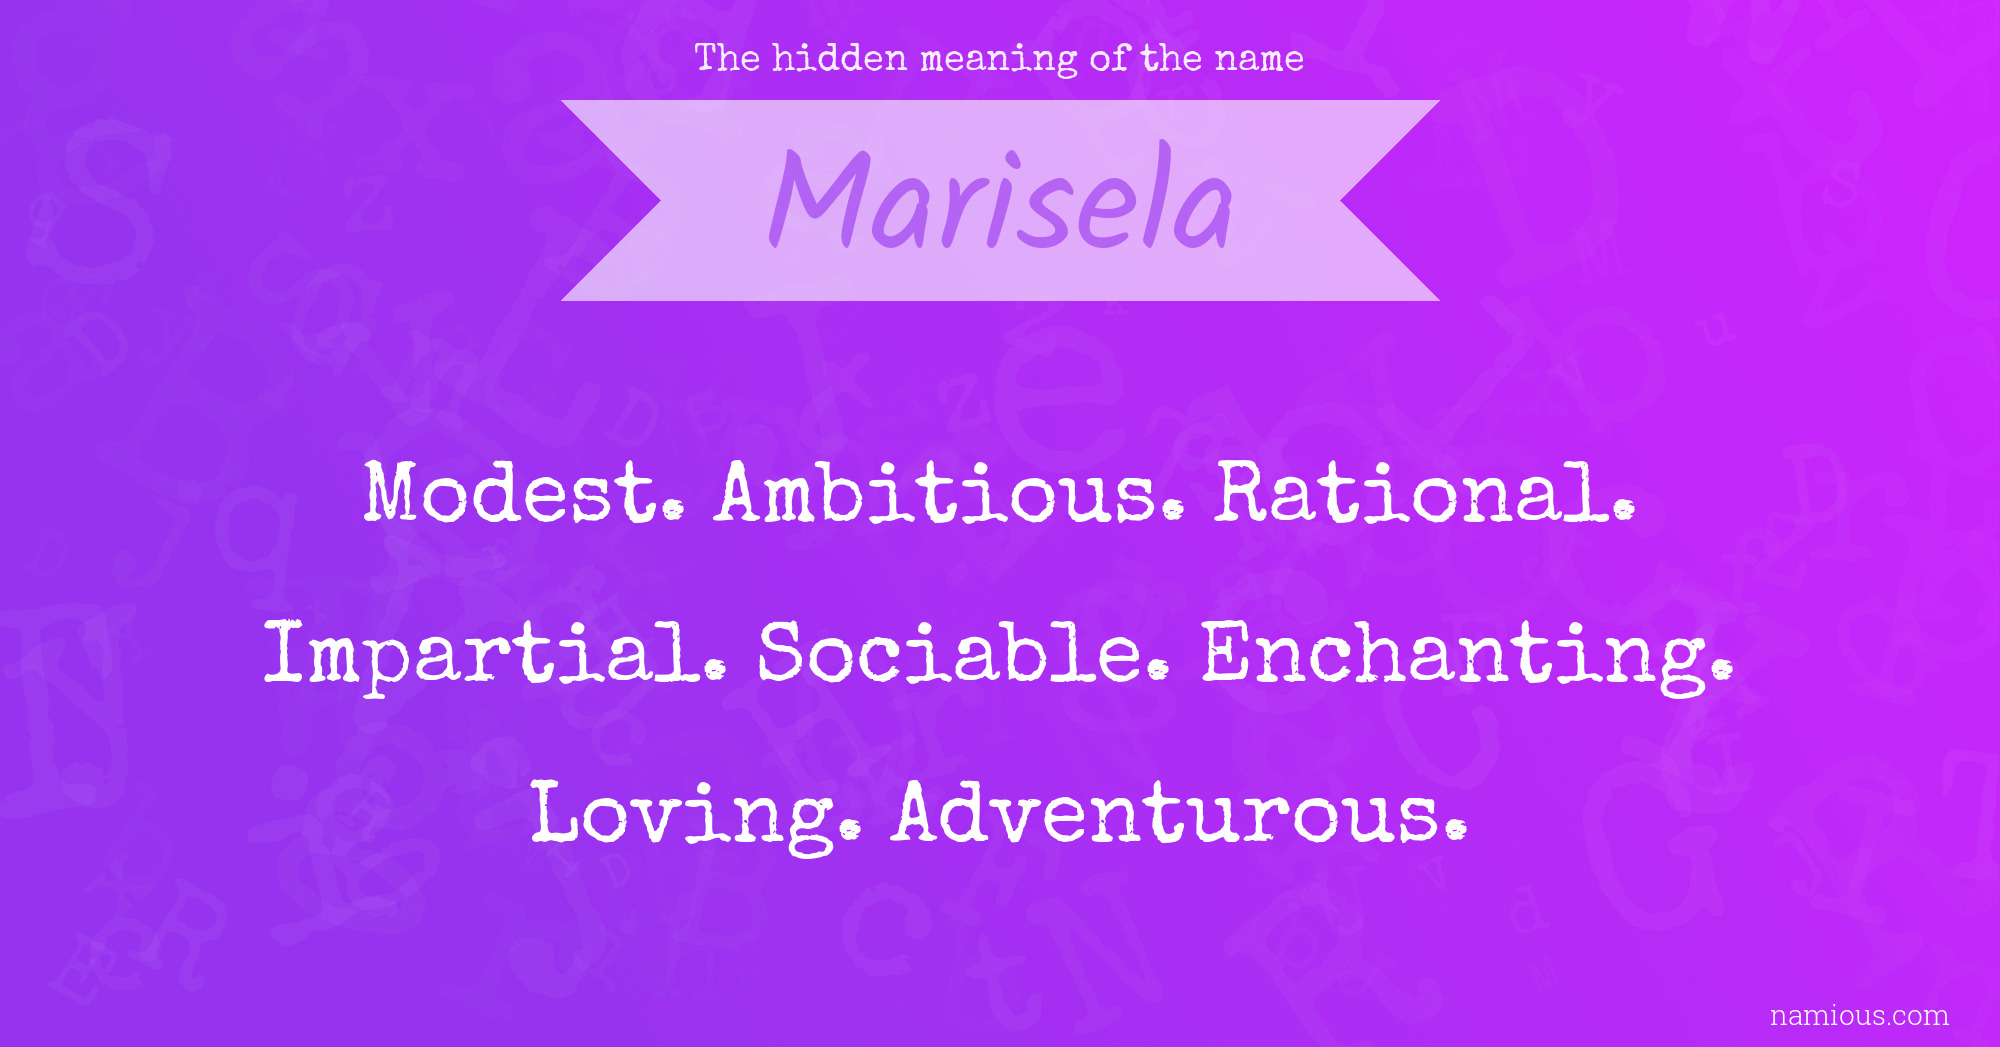 The hidden meaning of the name Marisela